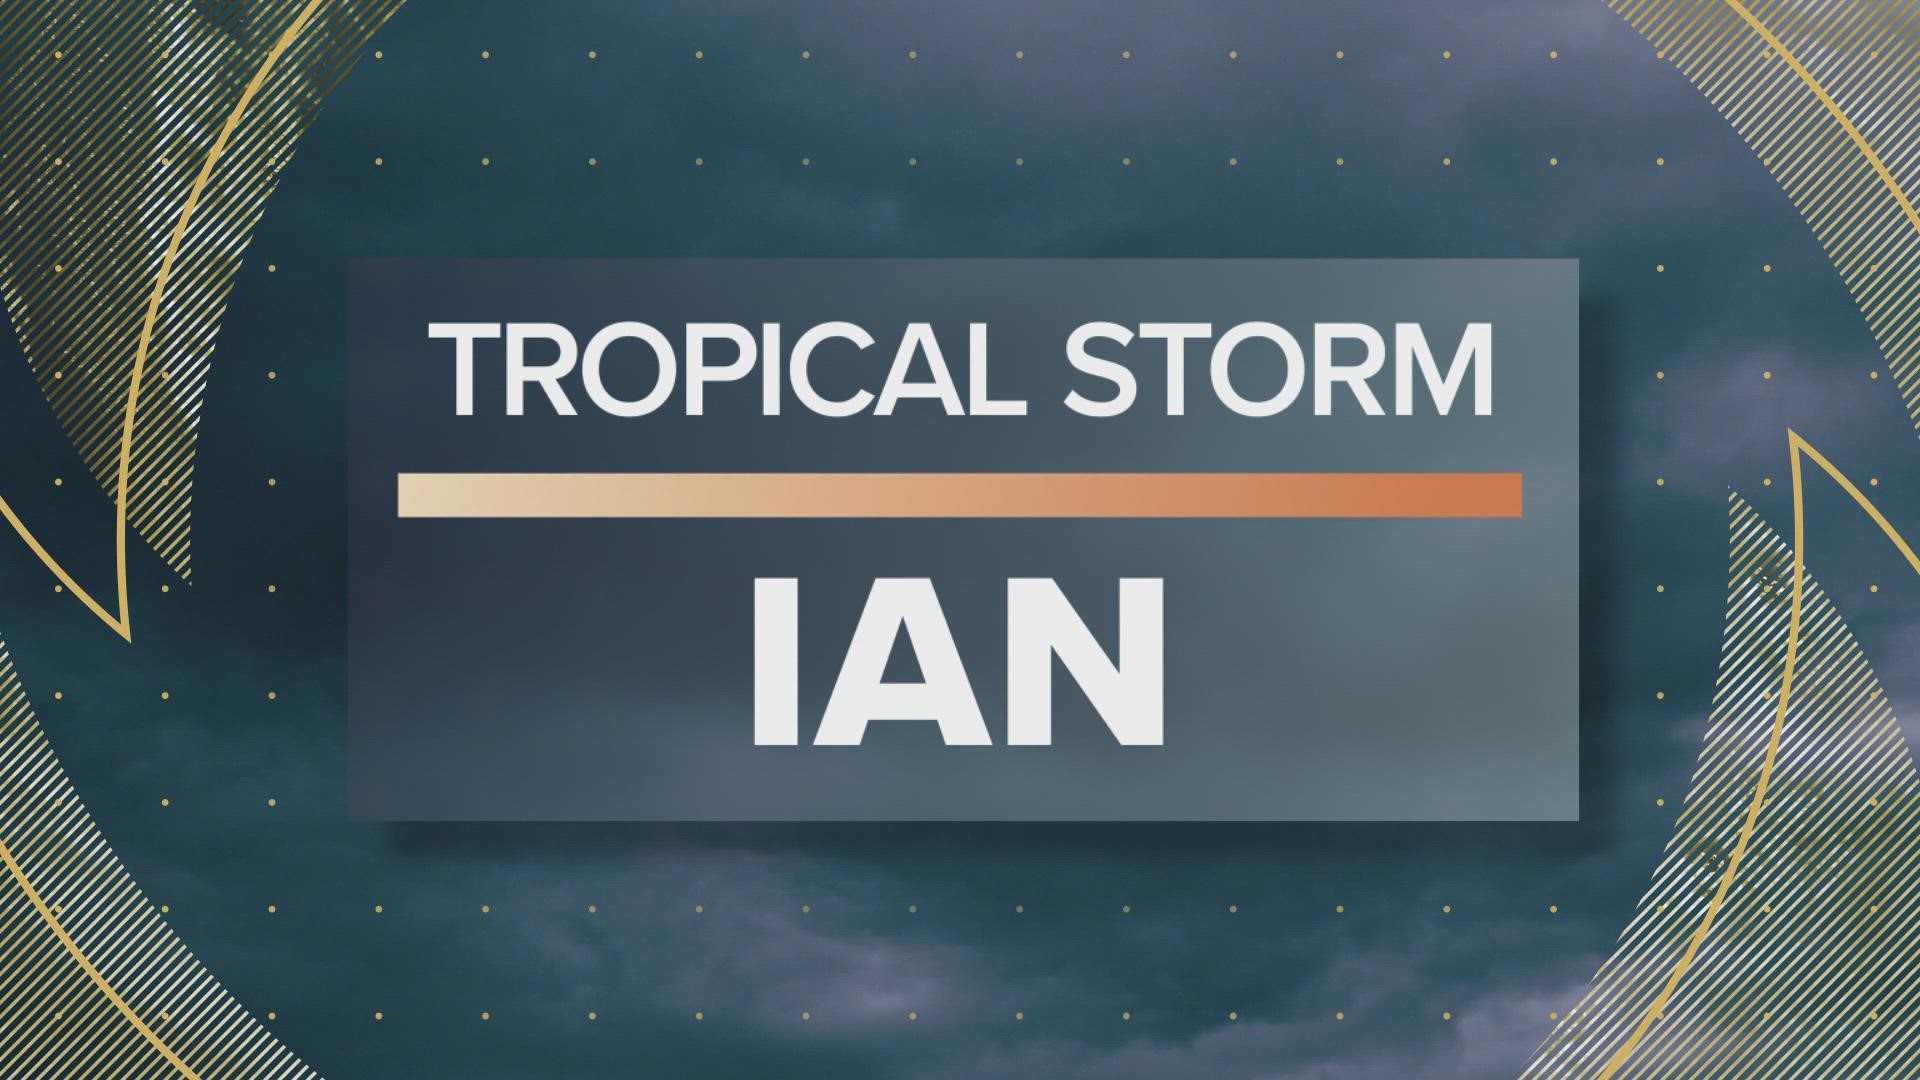 Ian is set become hurricane soon as it heads toward the Gulf of Mexico. New tropical storm watches have been issued for southwest Florida.